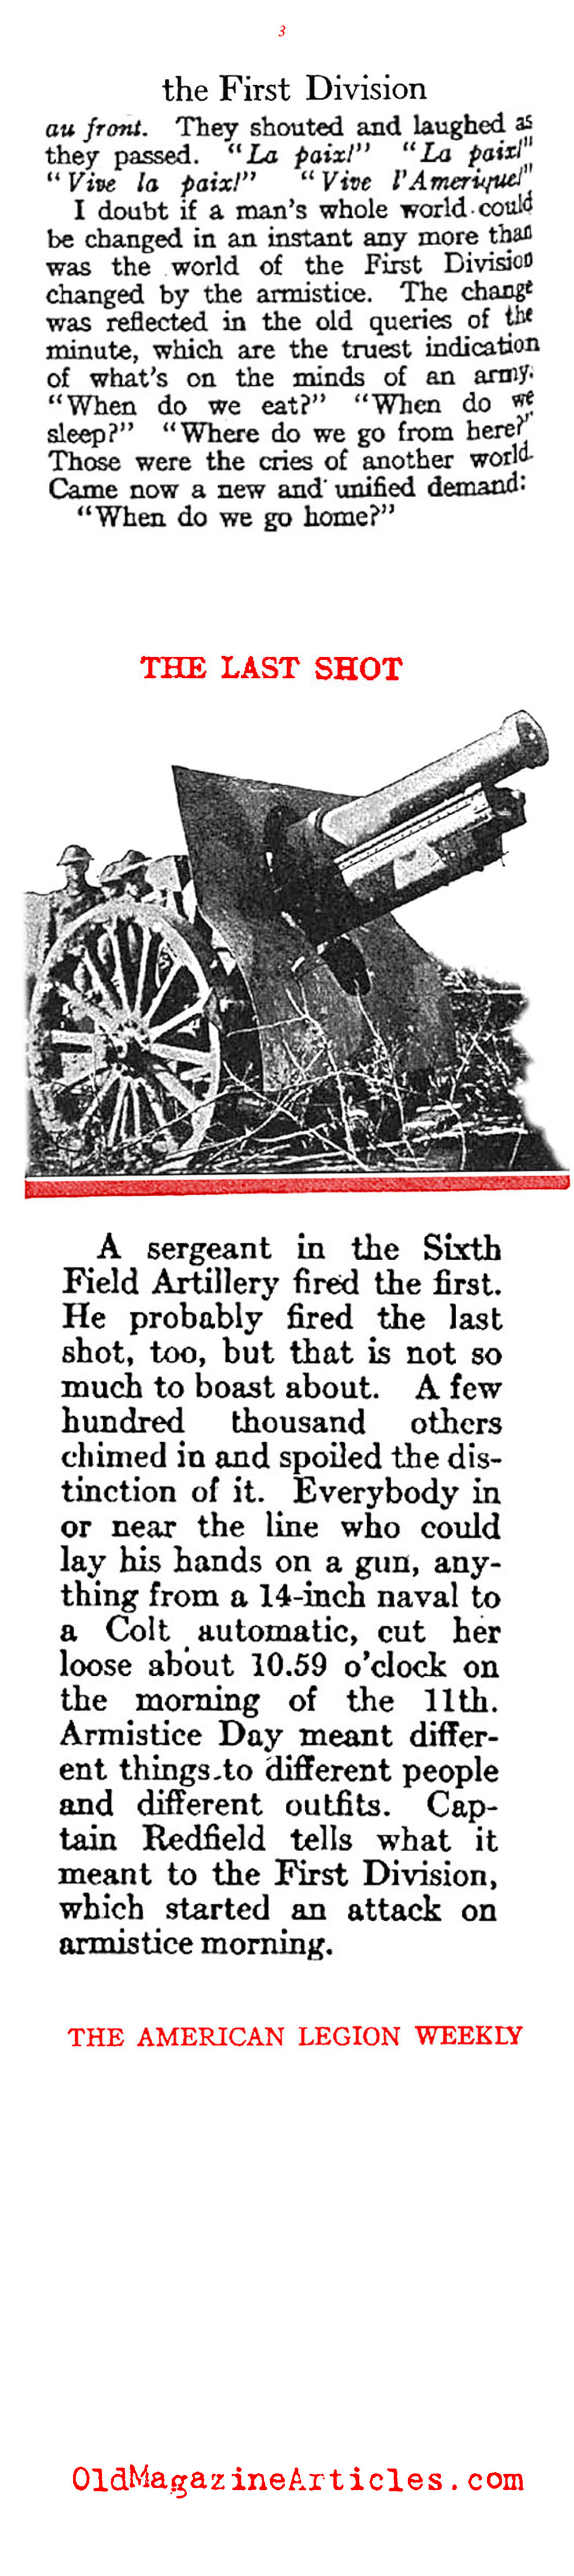 November 11th With the First Division (American Legion Weekly, 1919)